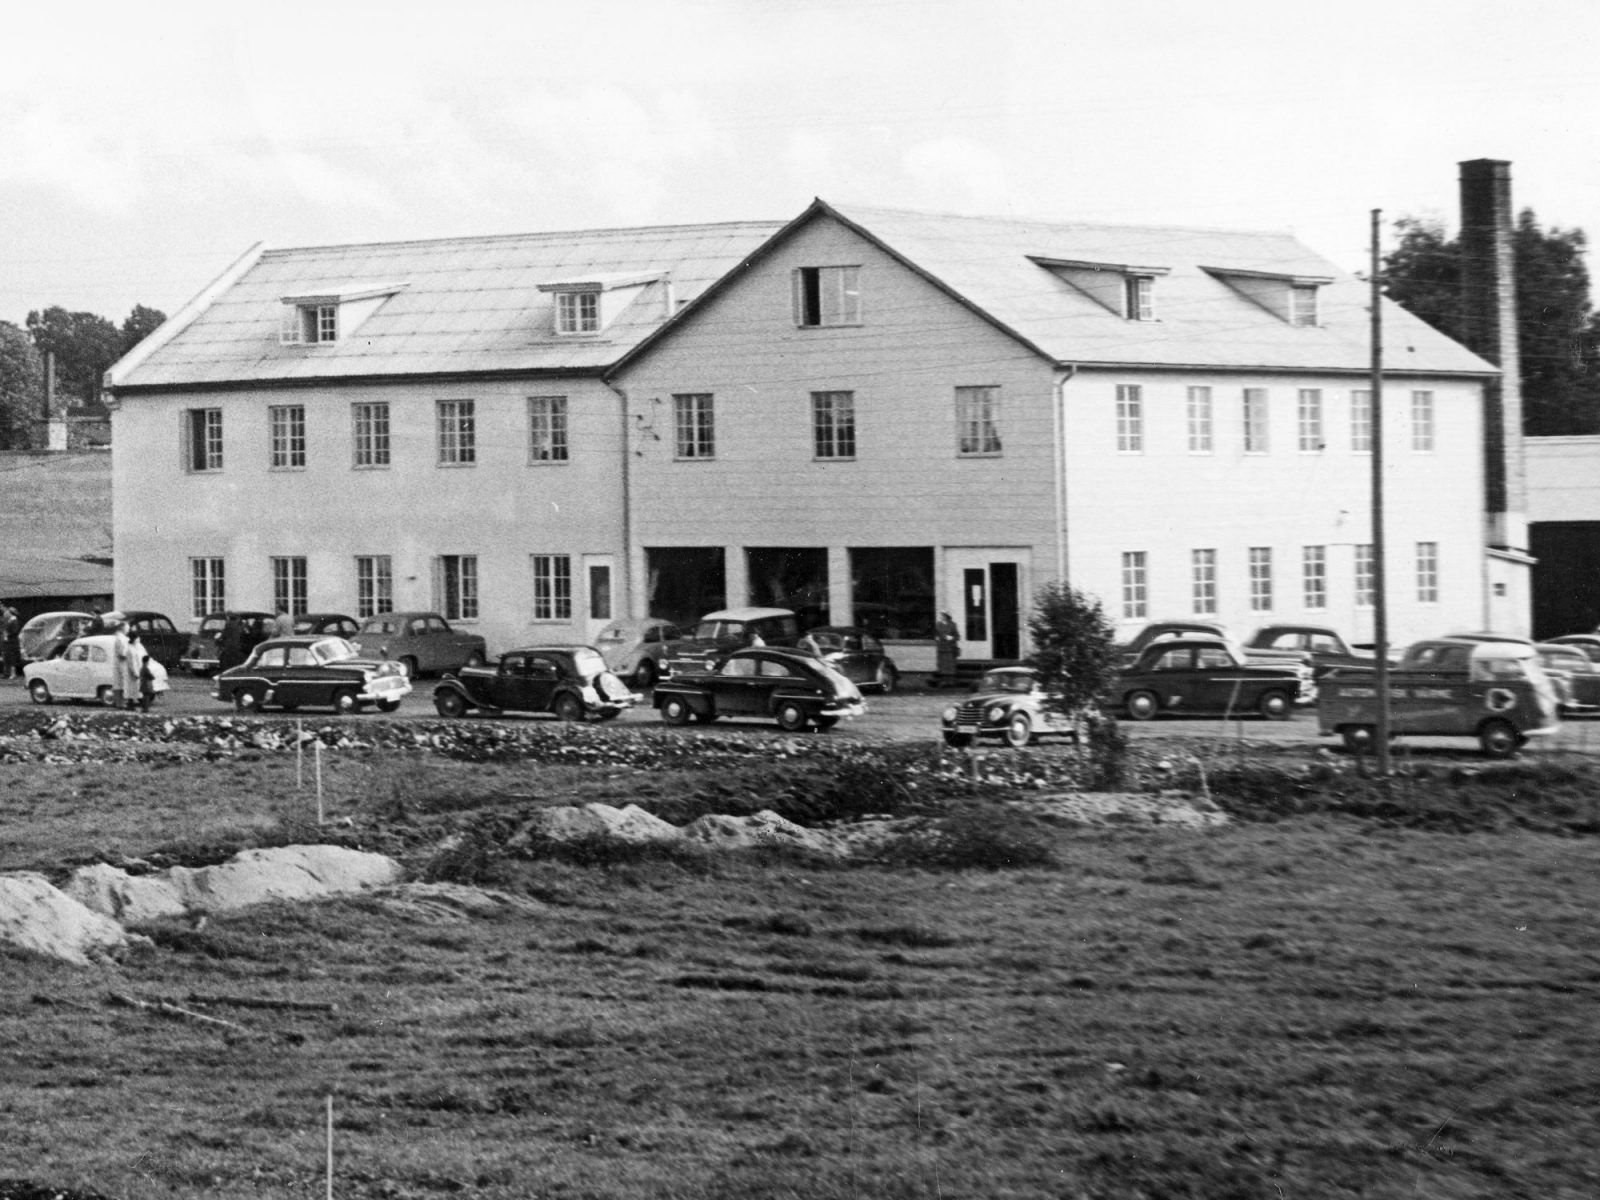 Large white two-storey building, 1950s cars parked outside, early-stage building site staked out in foreground.